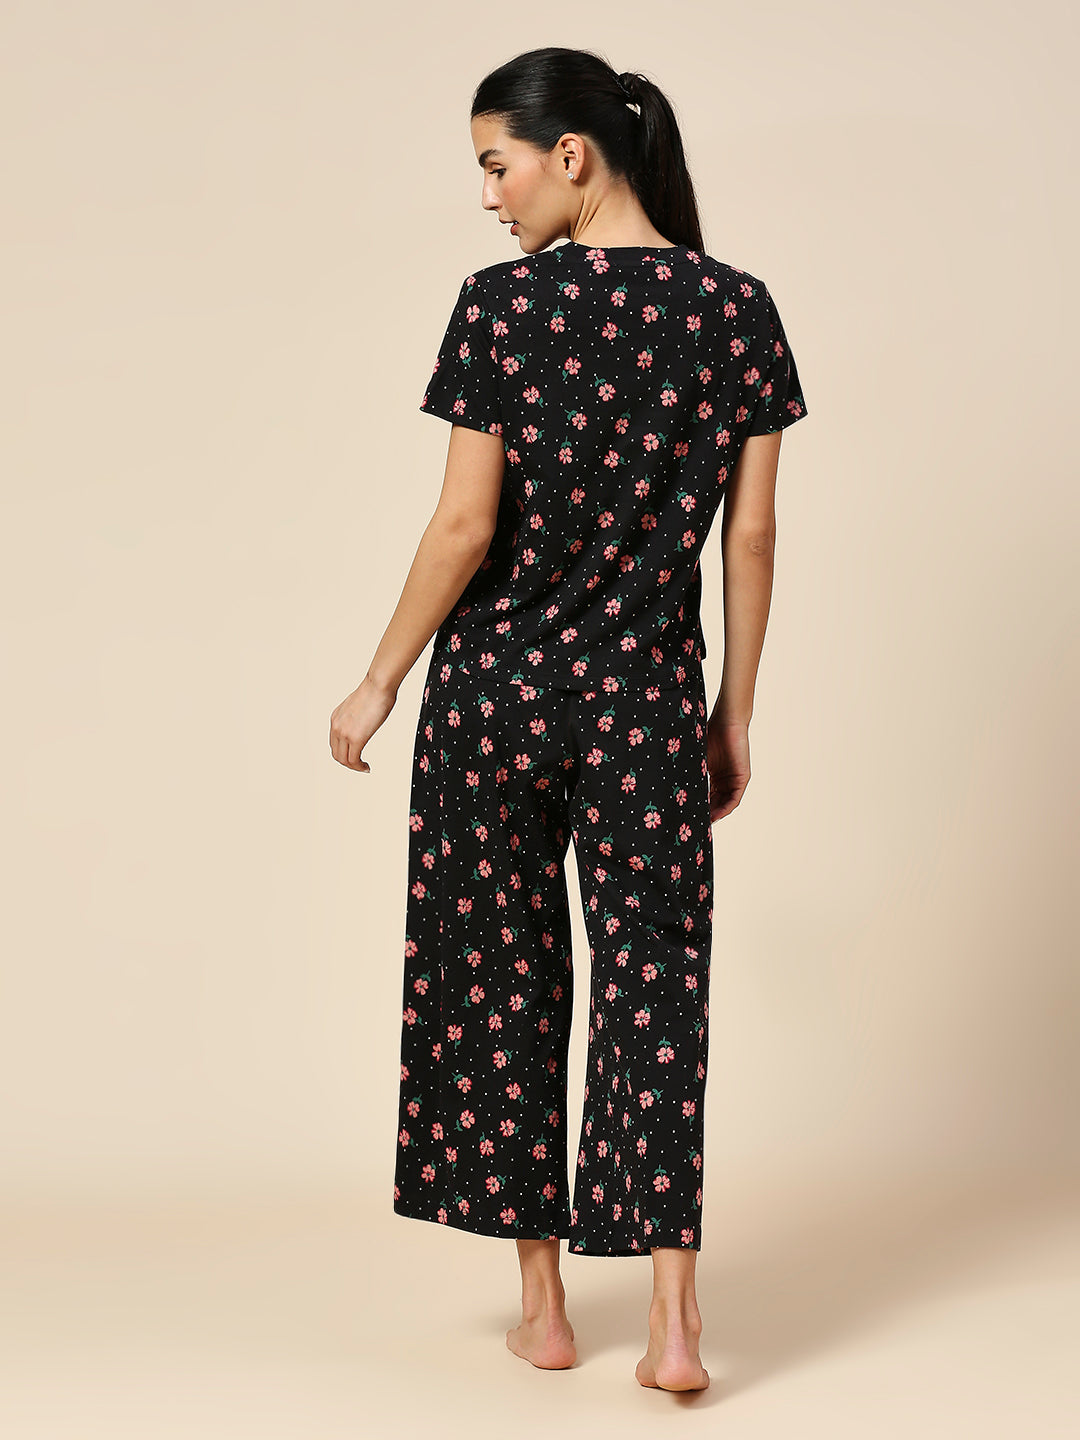 FLORAL PRINTED COTTON JERSEY ESSENTIAL LOUNGE SET